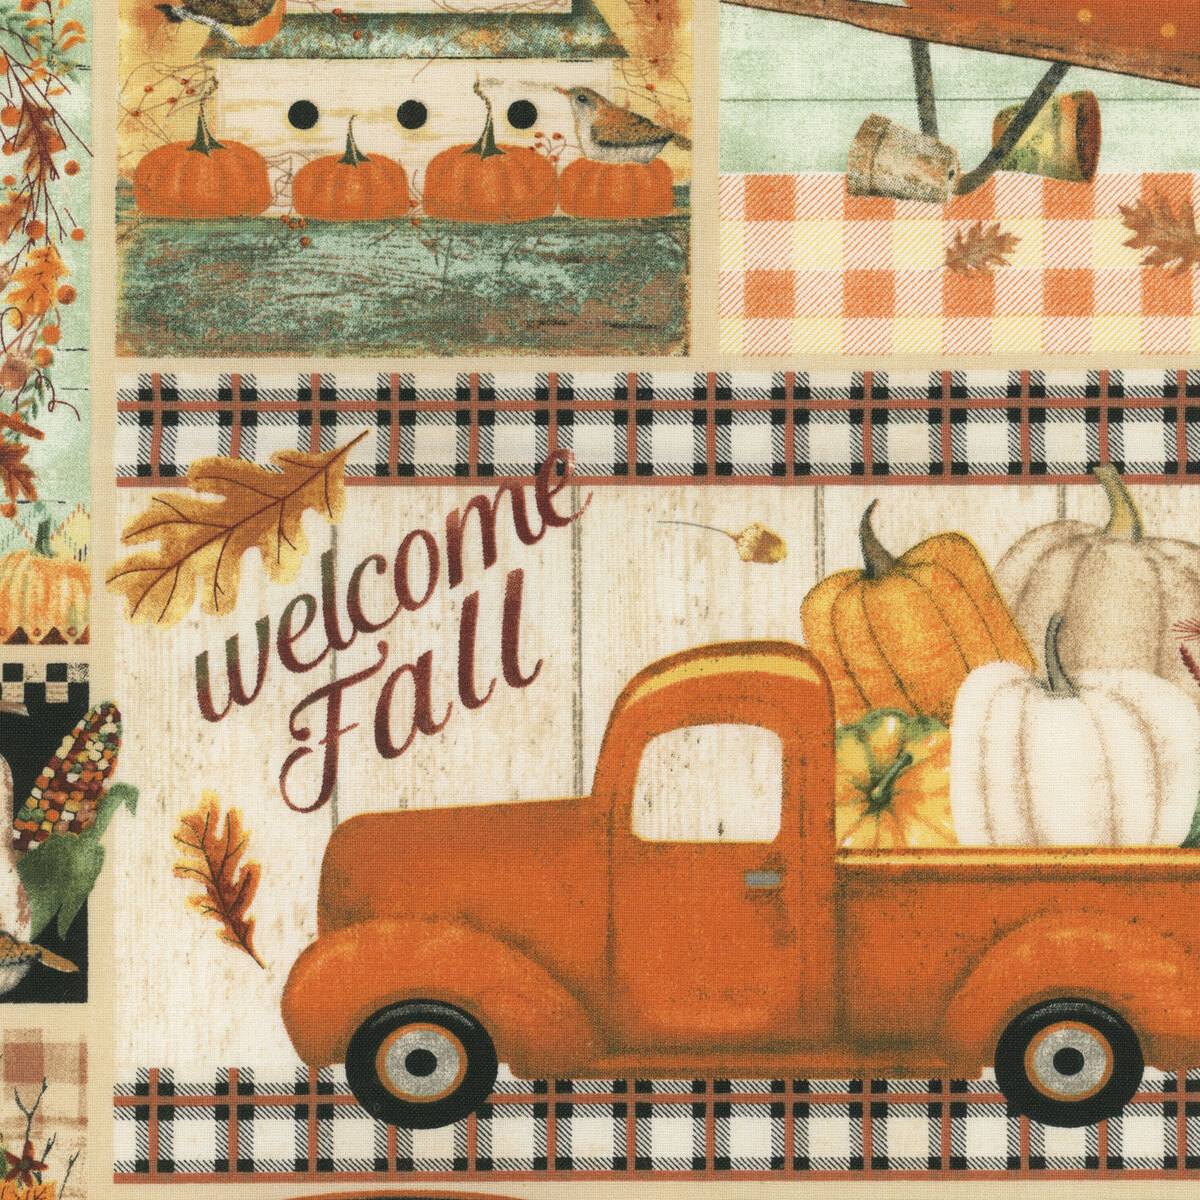 Welcome Fall with a Vintage Truck Filled With Pumpkins On a Fun